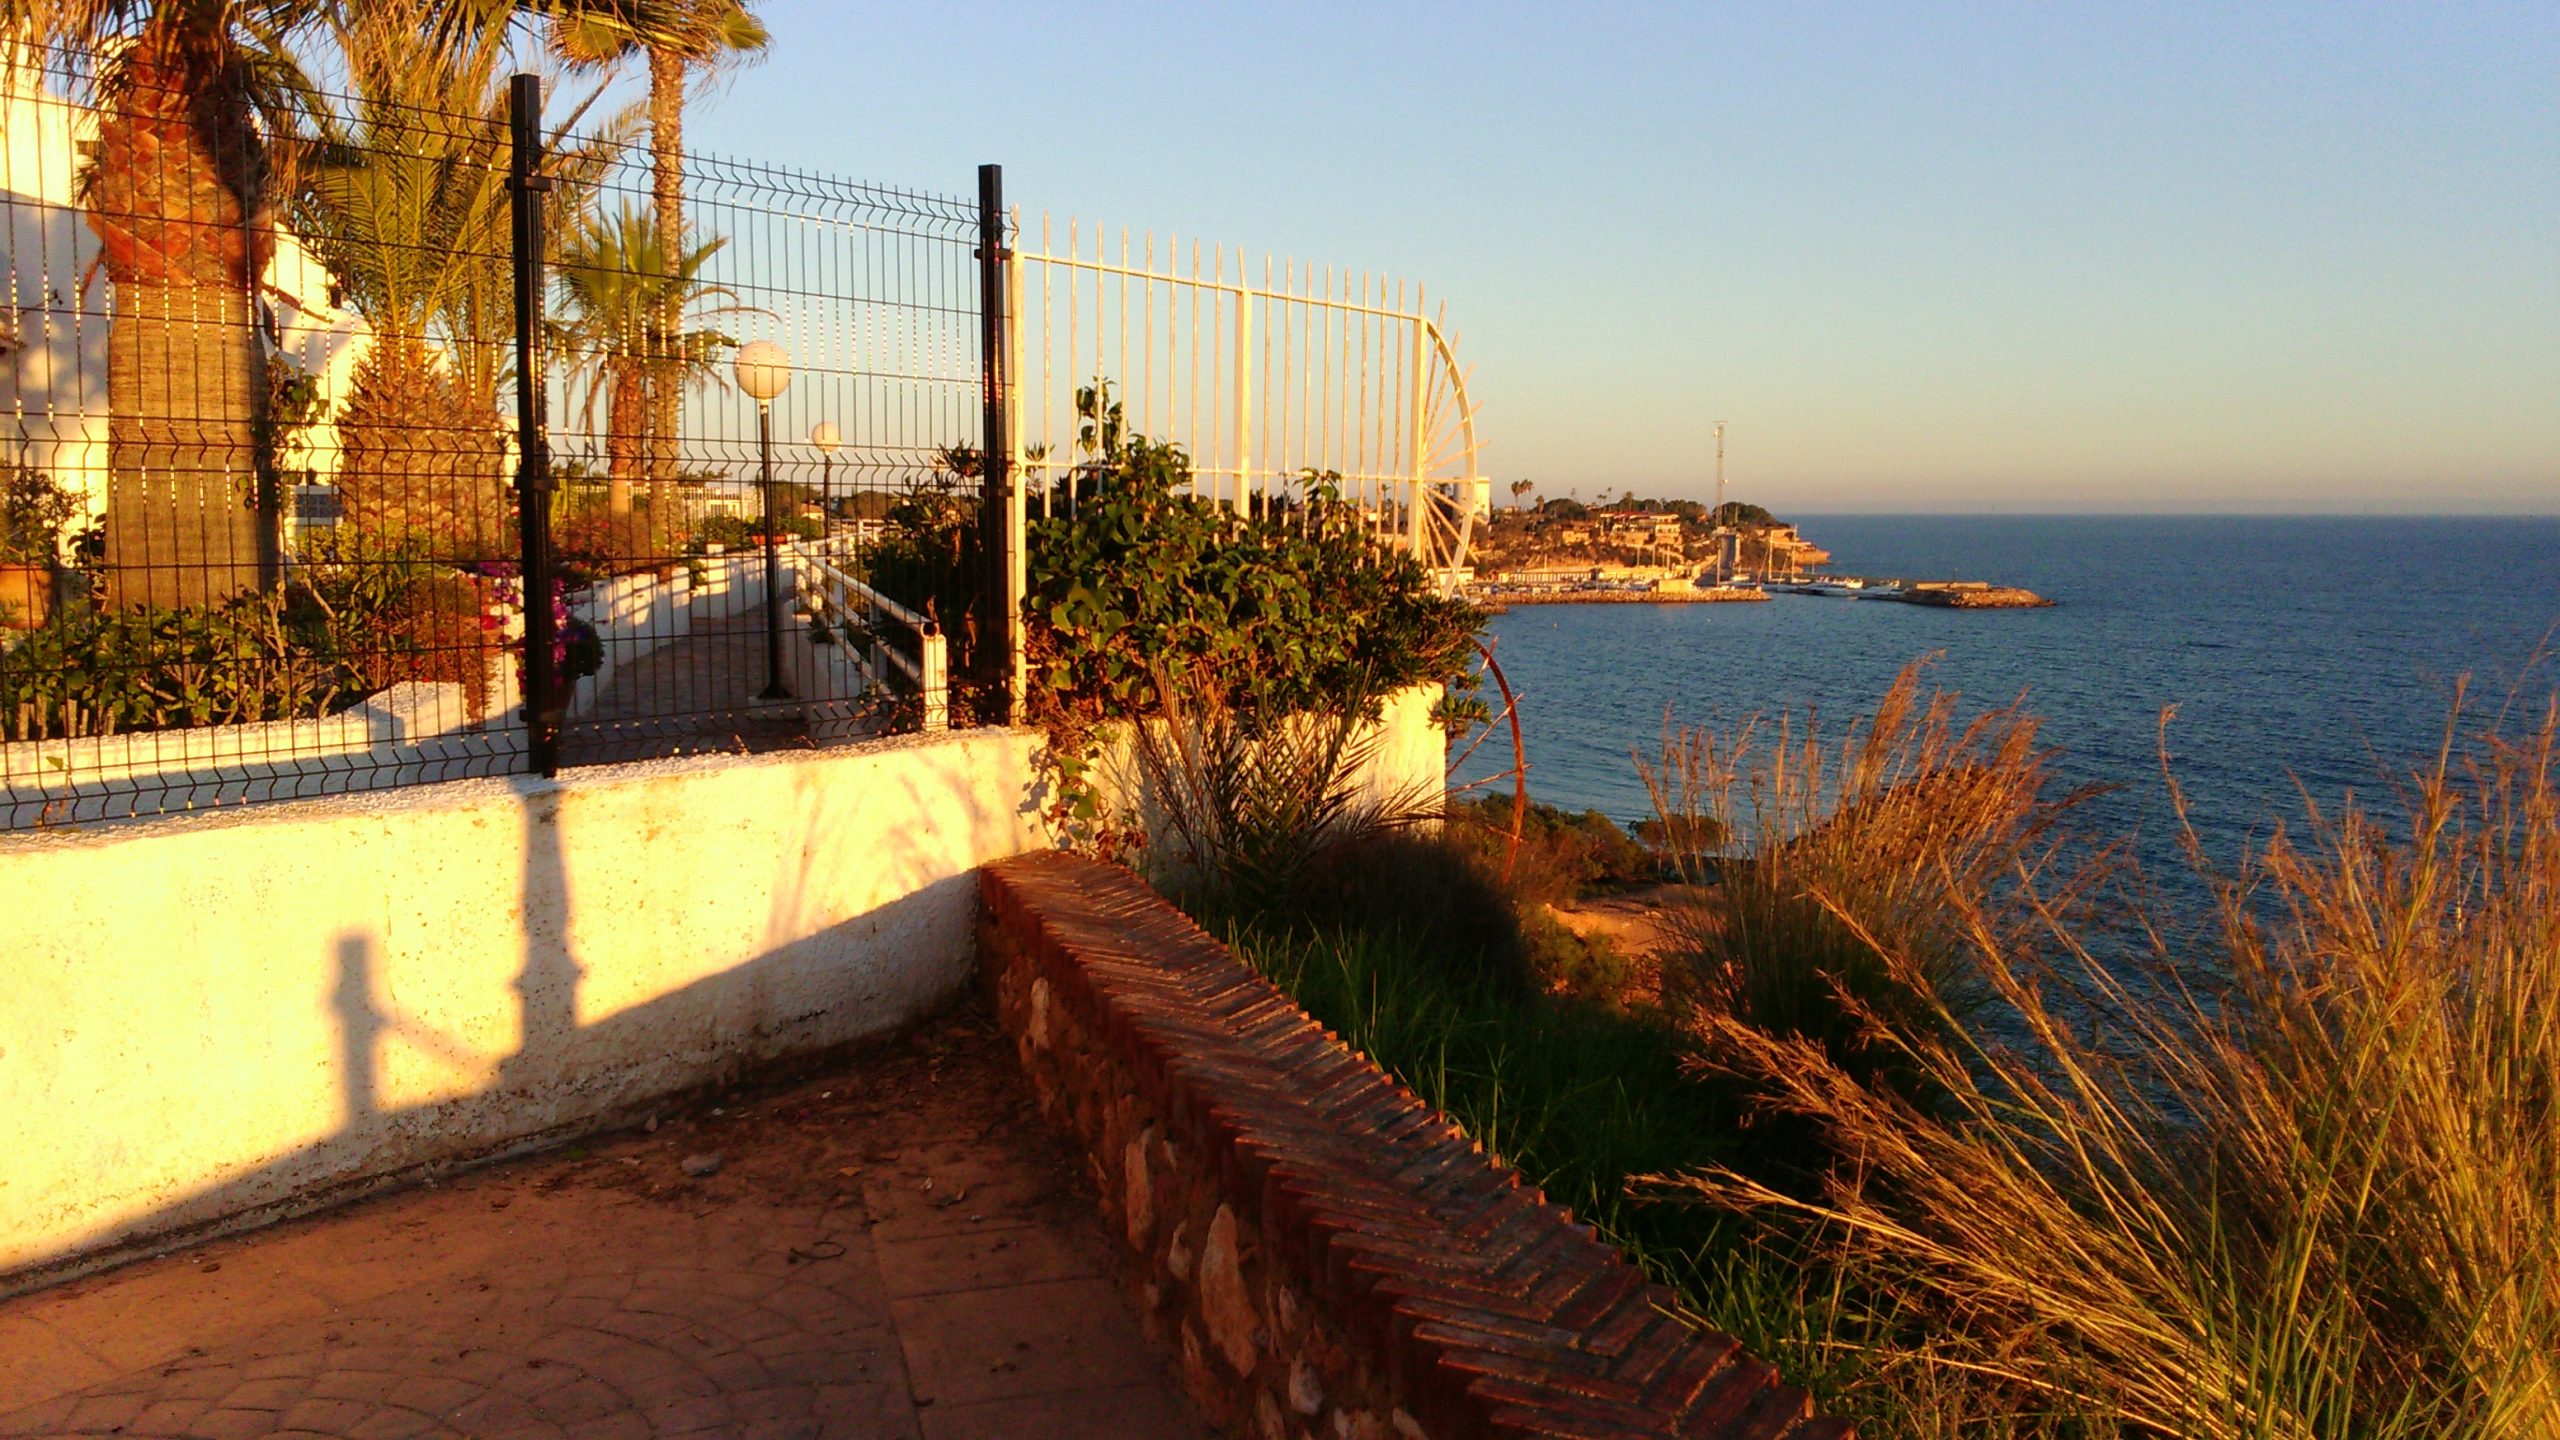 Decade Long Row Over Closed Seaside Footpath Could End Soon On Spain's Costa Blanca